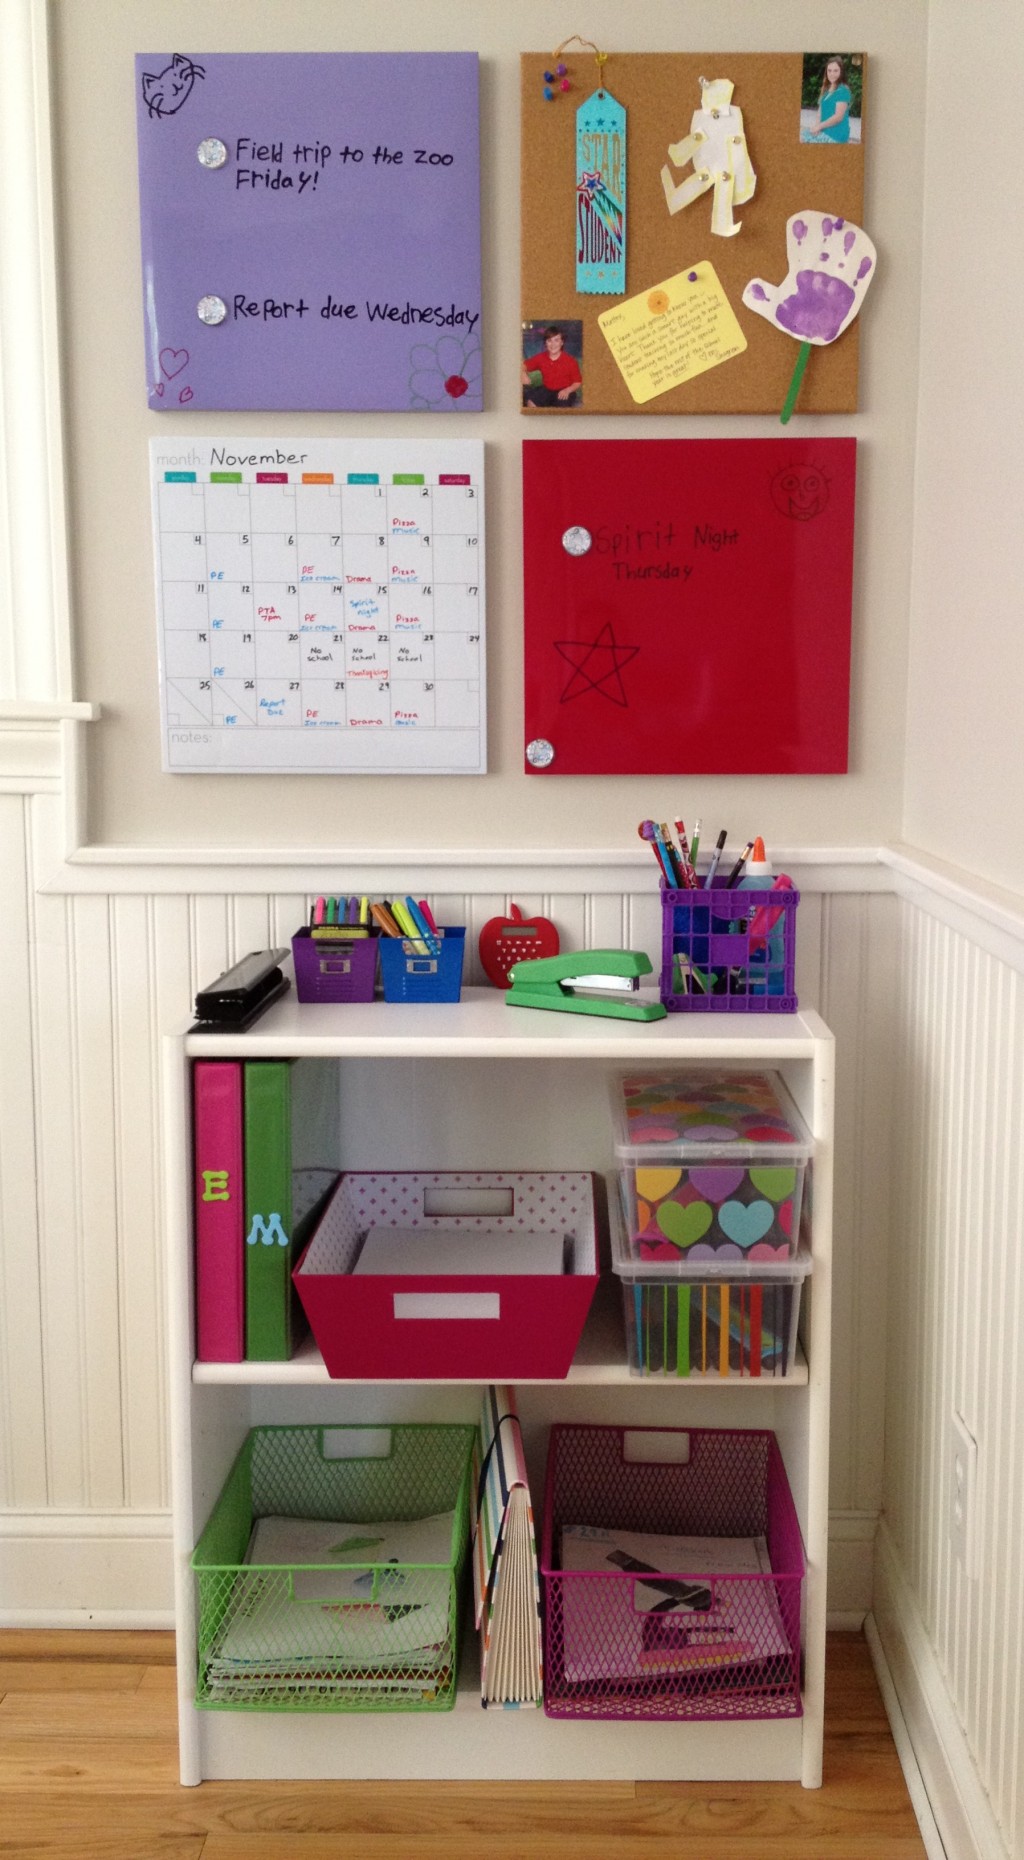 Photo of a student's organized wall and shelf station